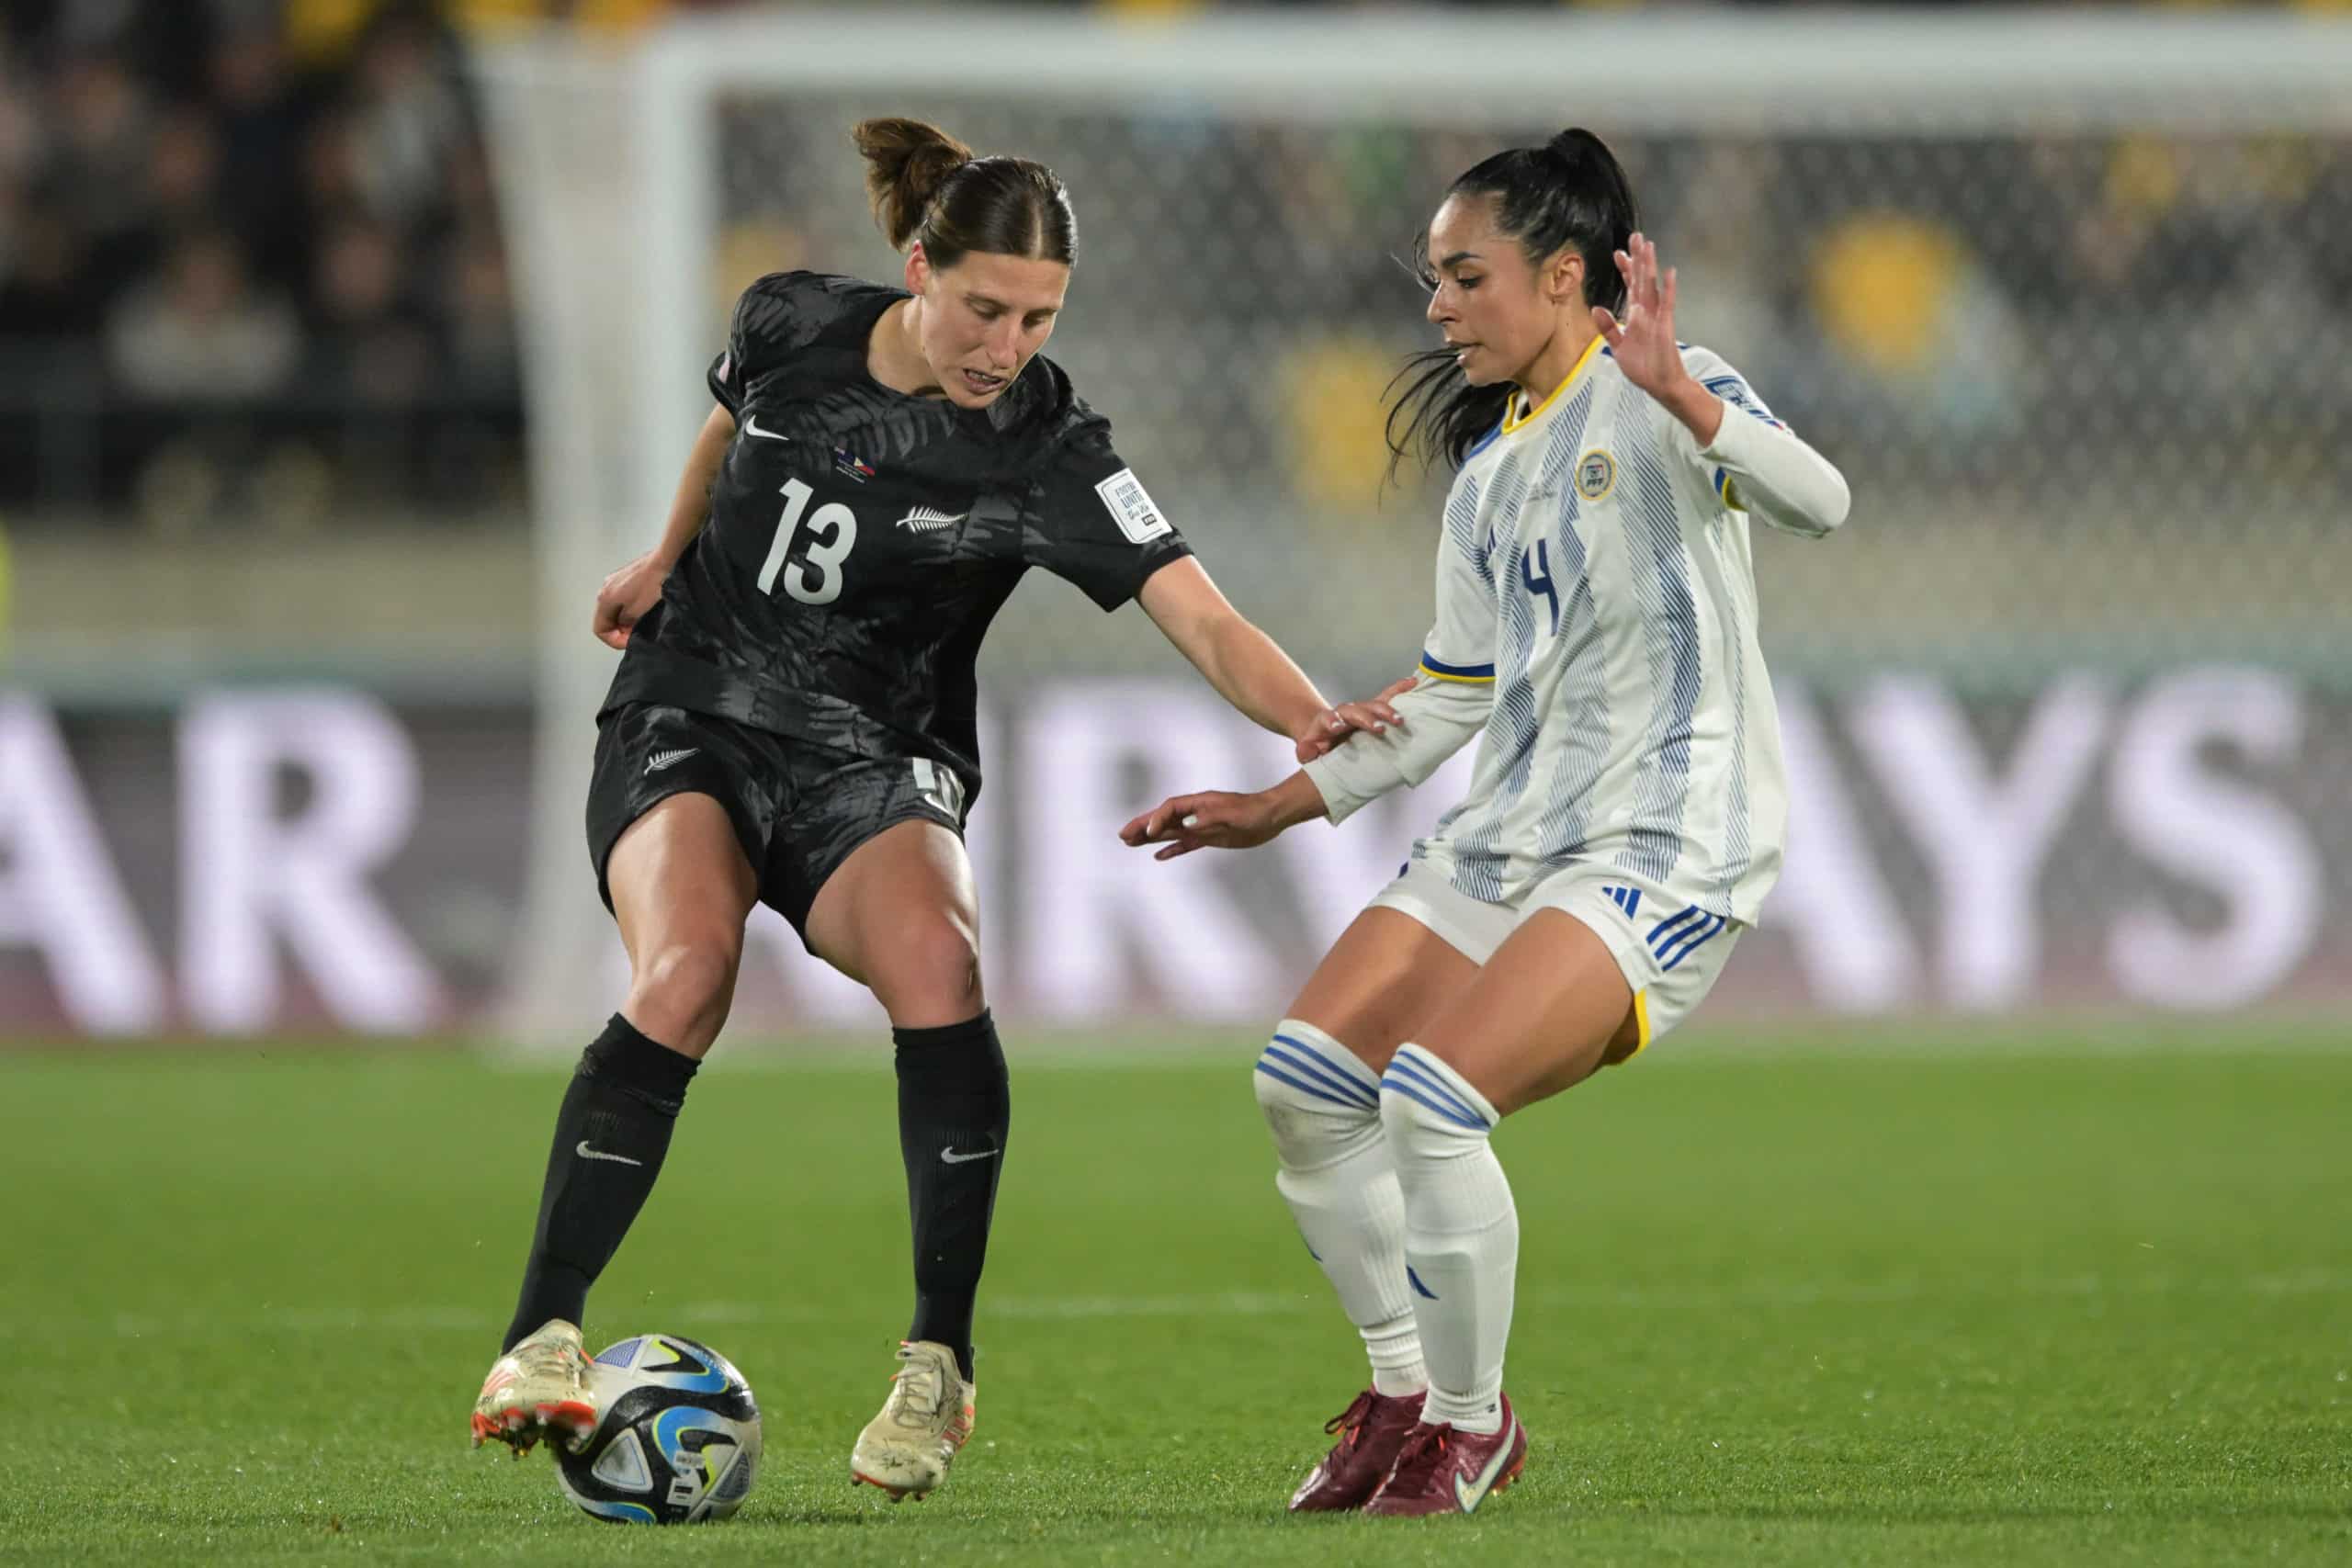 New Zealand: Rebekah Ashley Stott (L) of New Zealand Women soccer team and Jaclyn Katrina Sawicki (R) of Philippines Women soccer team seen in action during the FIFA Women s World Cup 2023